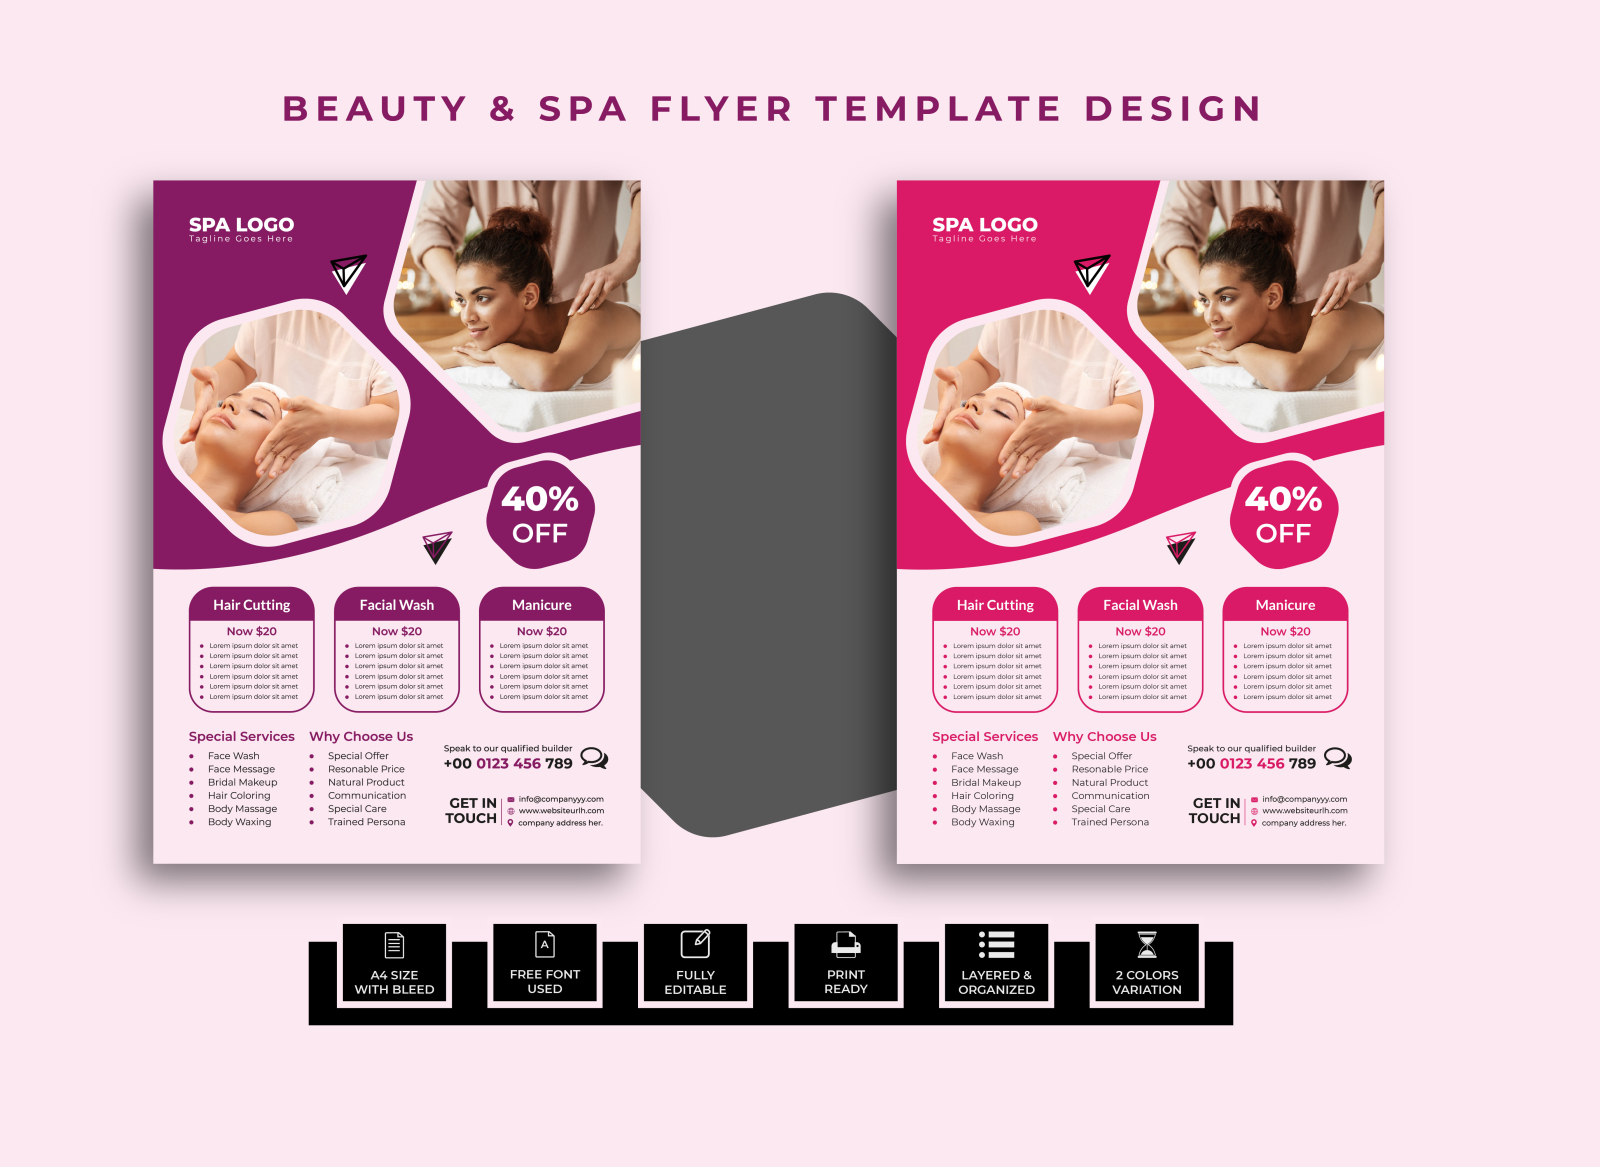 Beauty and Spa Flyer Template Design by Shorov Nath Shuvo on Dribbble